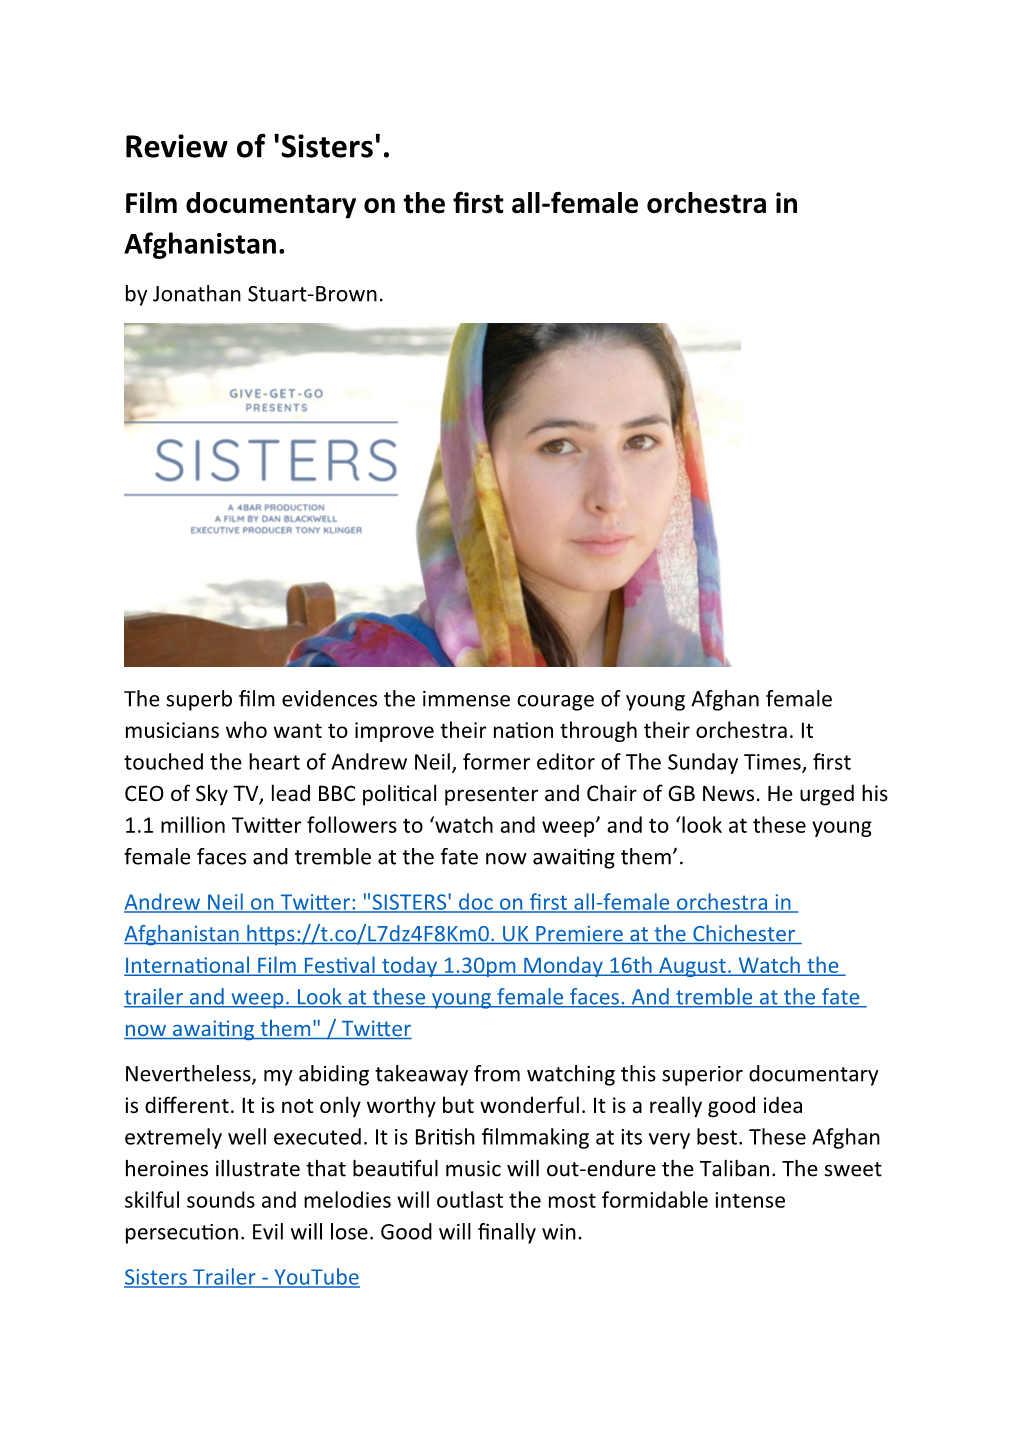 Review of 'Sisters'. Film Documentary on the First All-Female Orchestra in Afghanistan